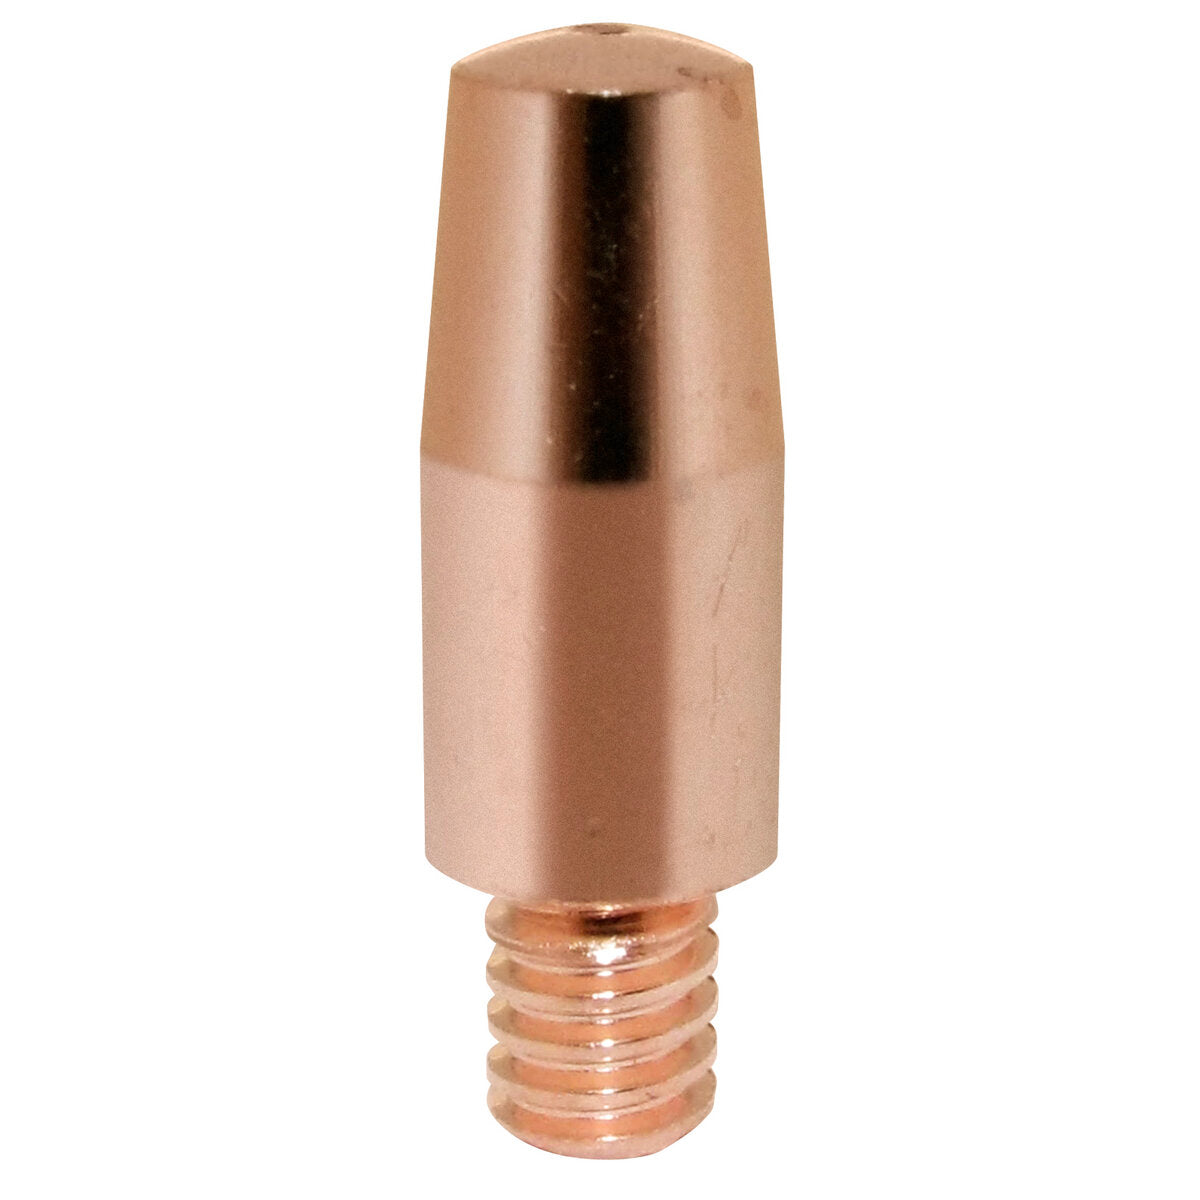 Lincoln Electric - Copper Plus® Contact Tip - 350A, Standard, 0.035 in (10/pack) - KP2744-035